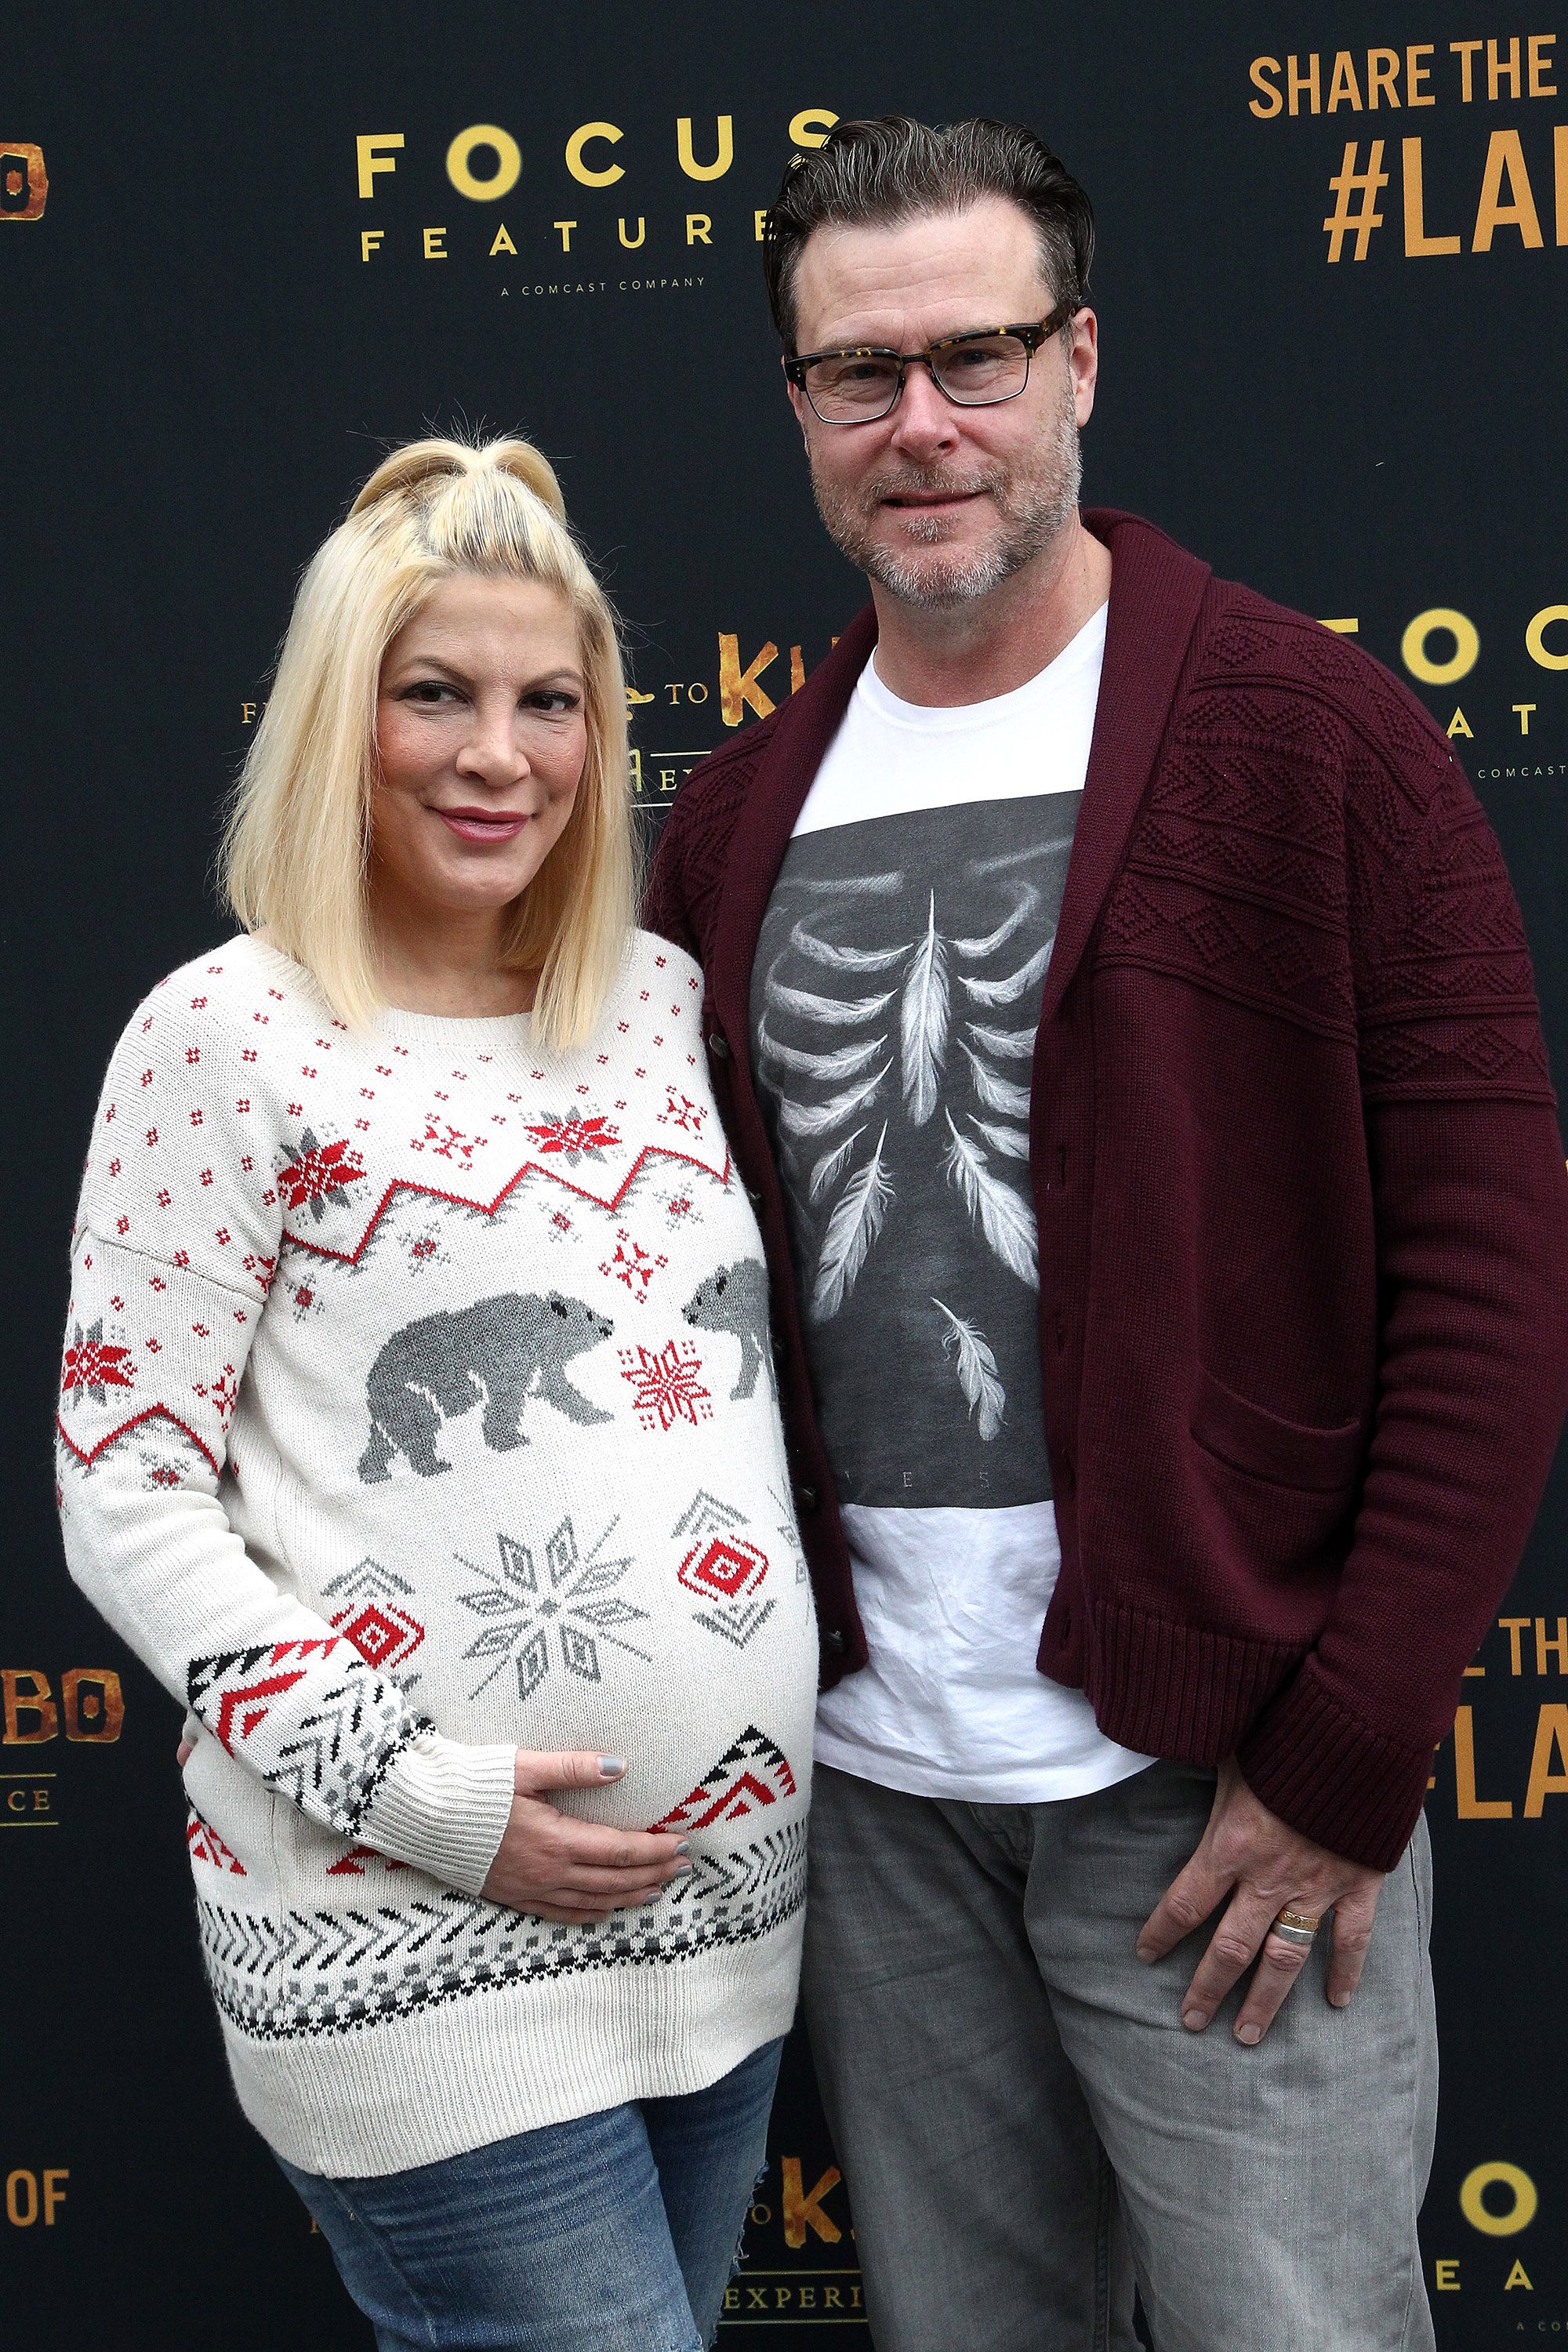 Tori Spelling and Dean McDermott at the grand reopening event for "From Coraline to Kubo: A Magical LAIKA Experience" on December 21, 2016, in Universal City, California | Photo: Tommaso Boddi/Getty Images